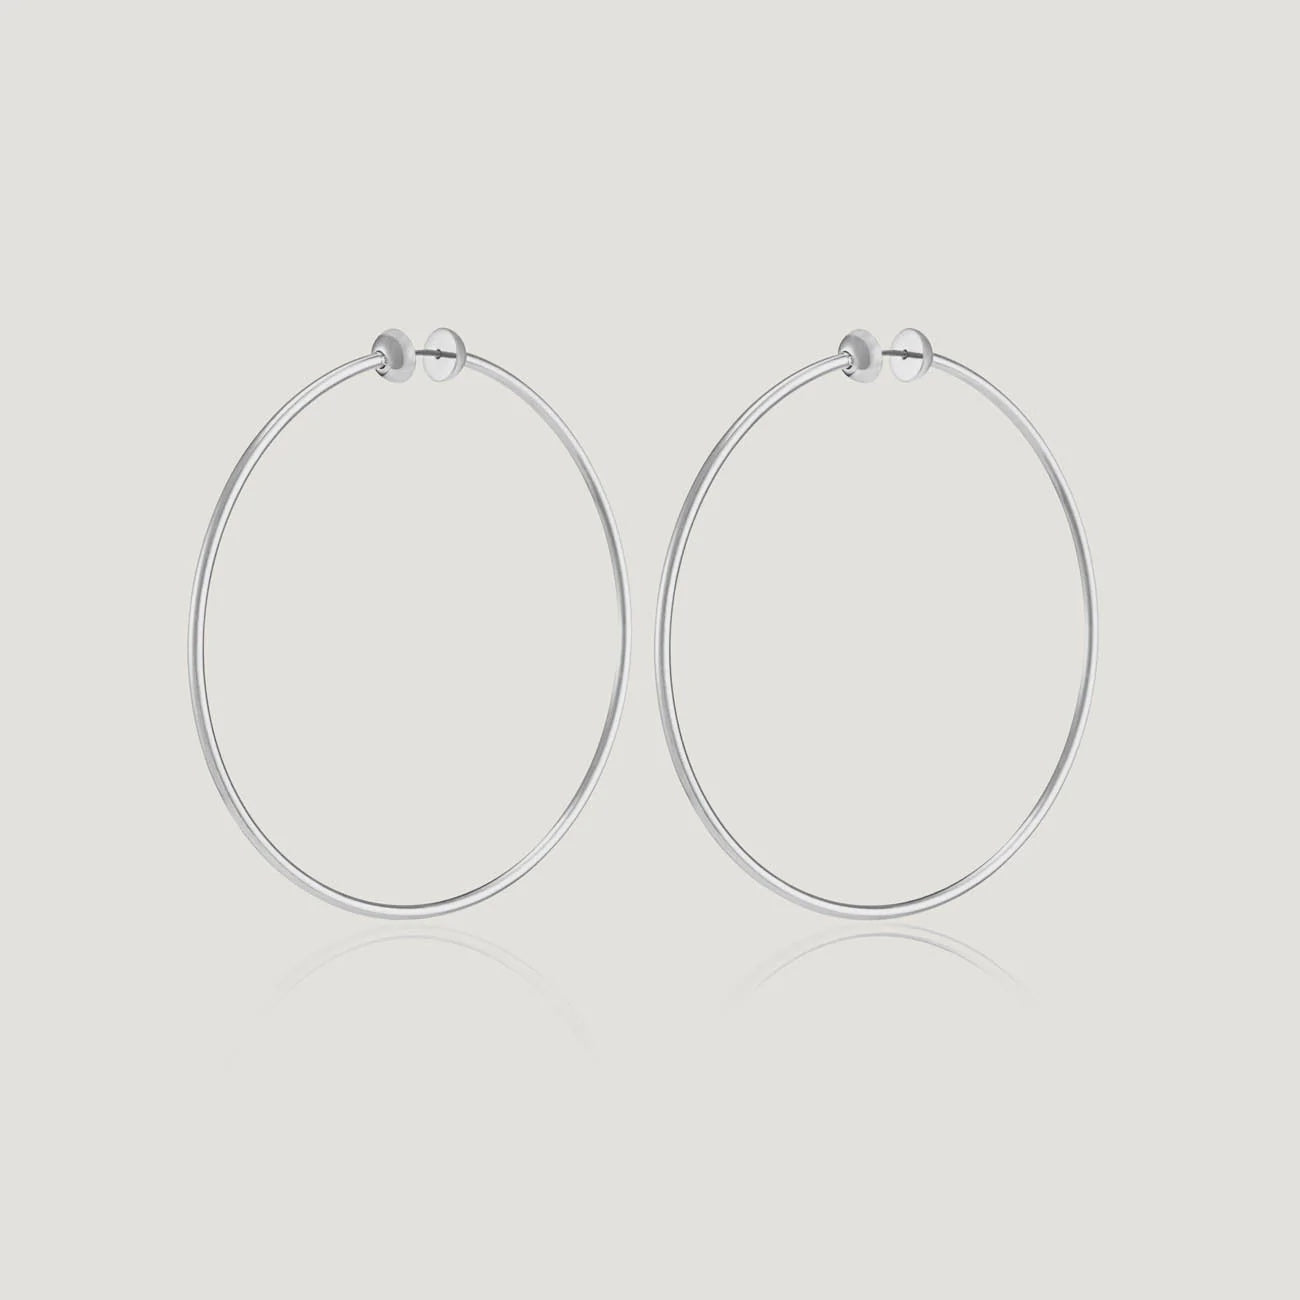 JENNY BIRD - ICON HOOPS LARGE IN SILVER